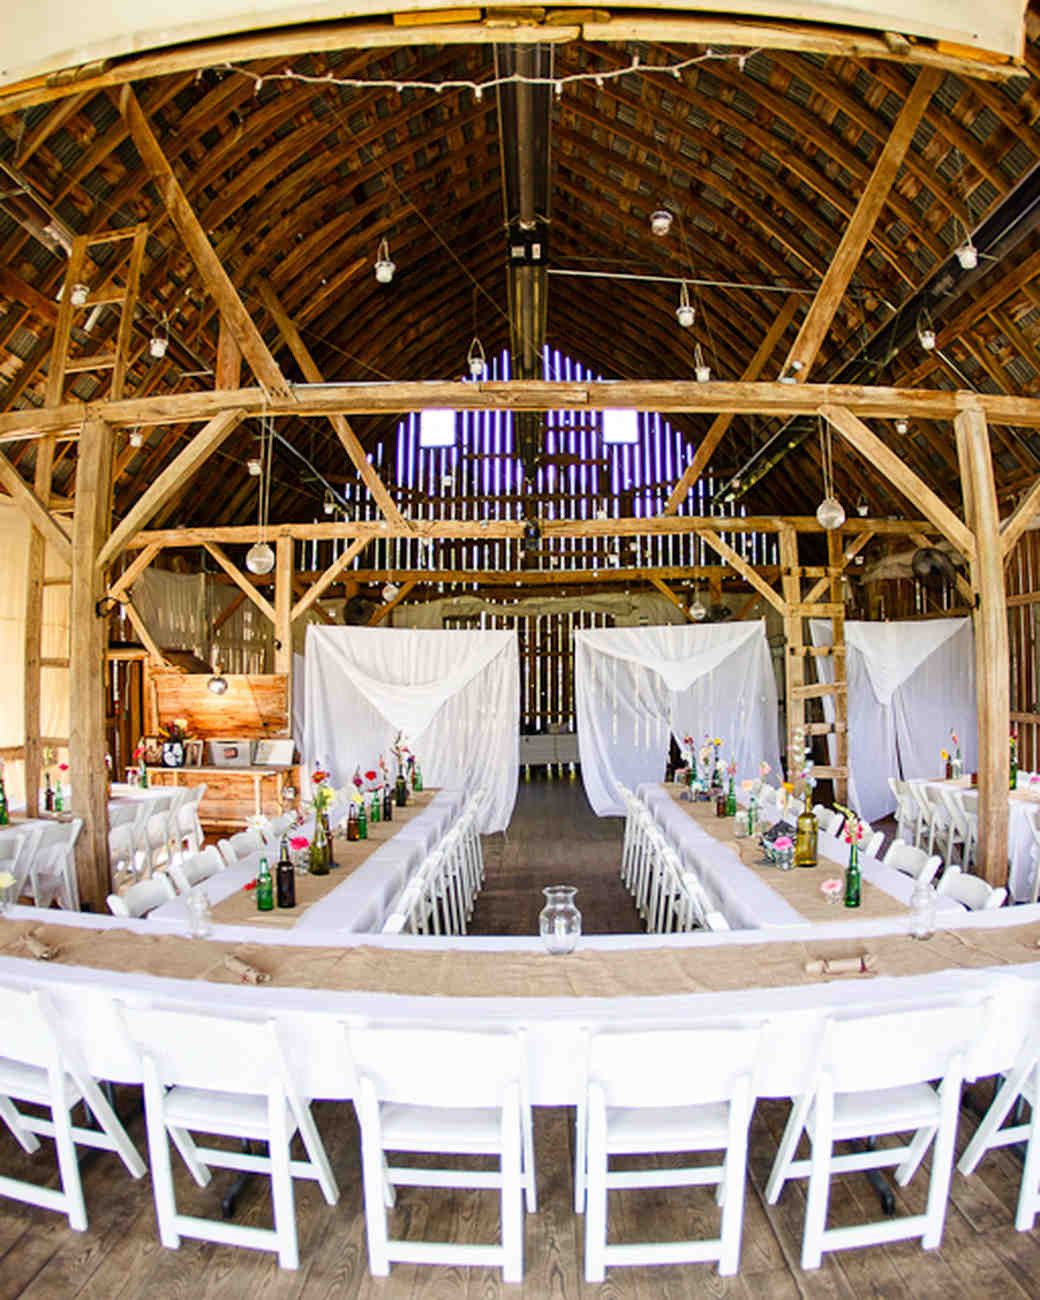 Rustic Wedding Venues
 11 Rustic Wedding Venues to Book for Your Big Day